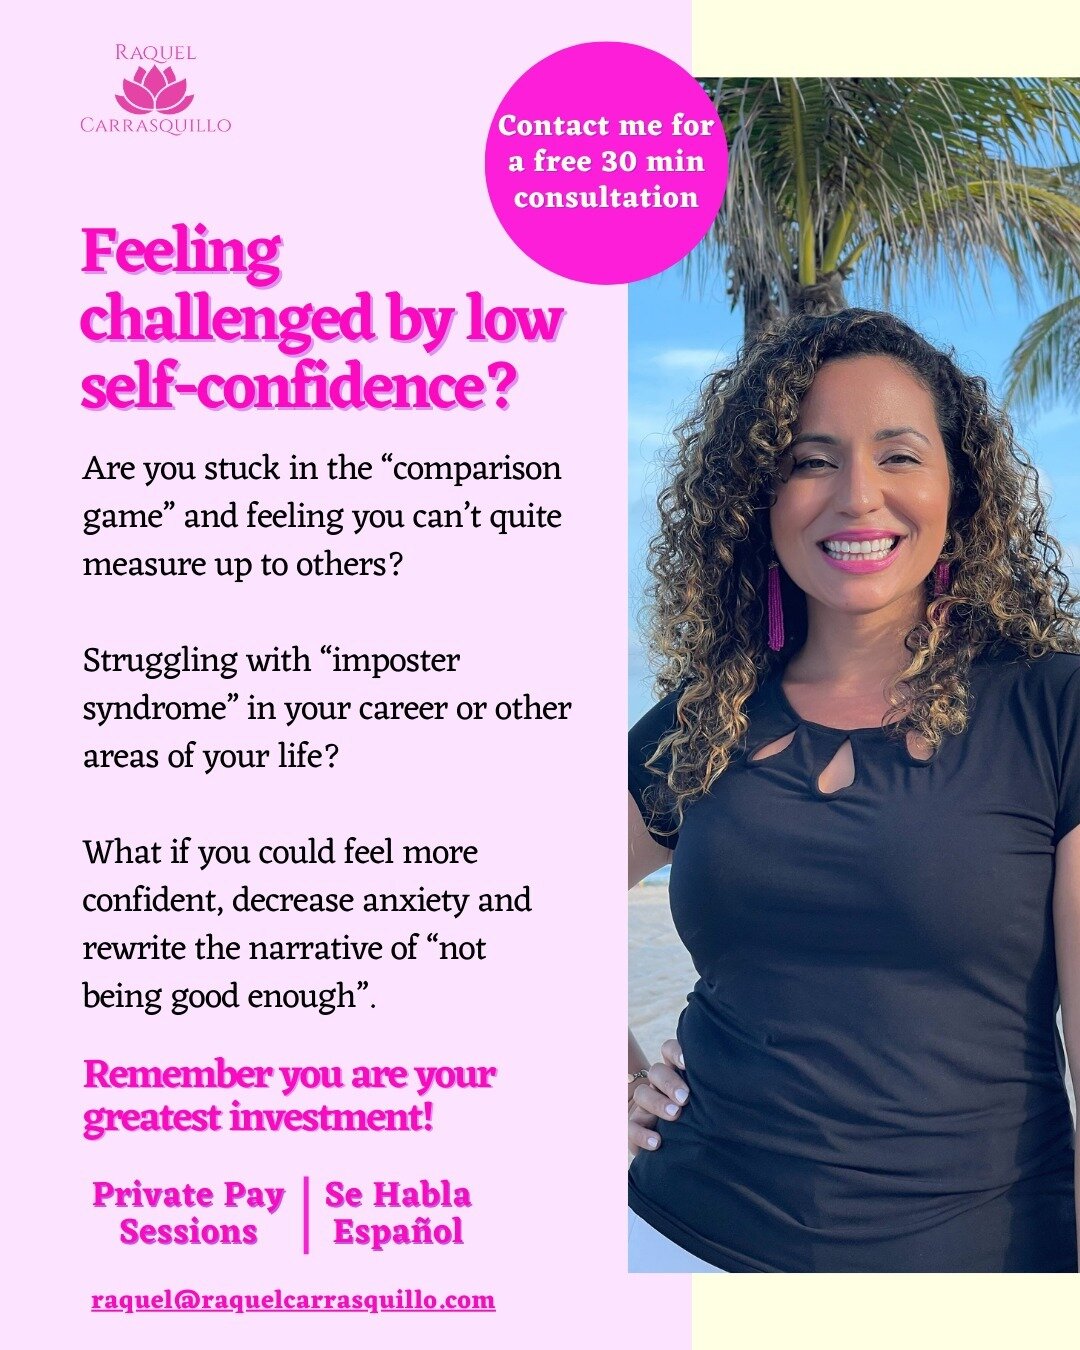 Some of the most rewarding work I do is helping clients tap into what is possible. I see transformational changes in their lives which fills my heart each and every time. 

The truth is that your experience of &ldquo;imposter syndrome&rdquo;, self-do